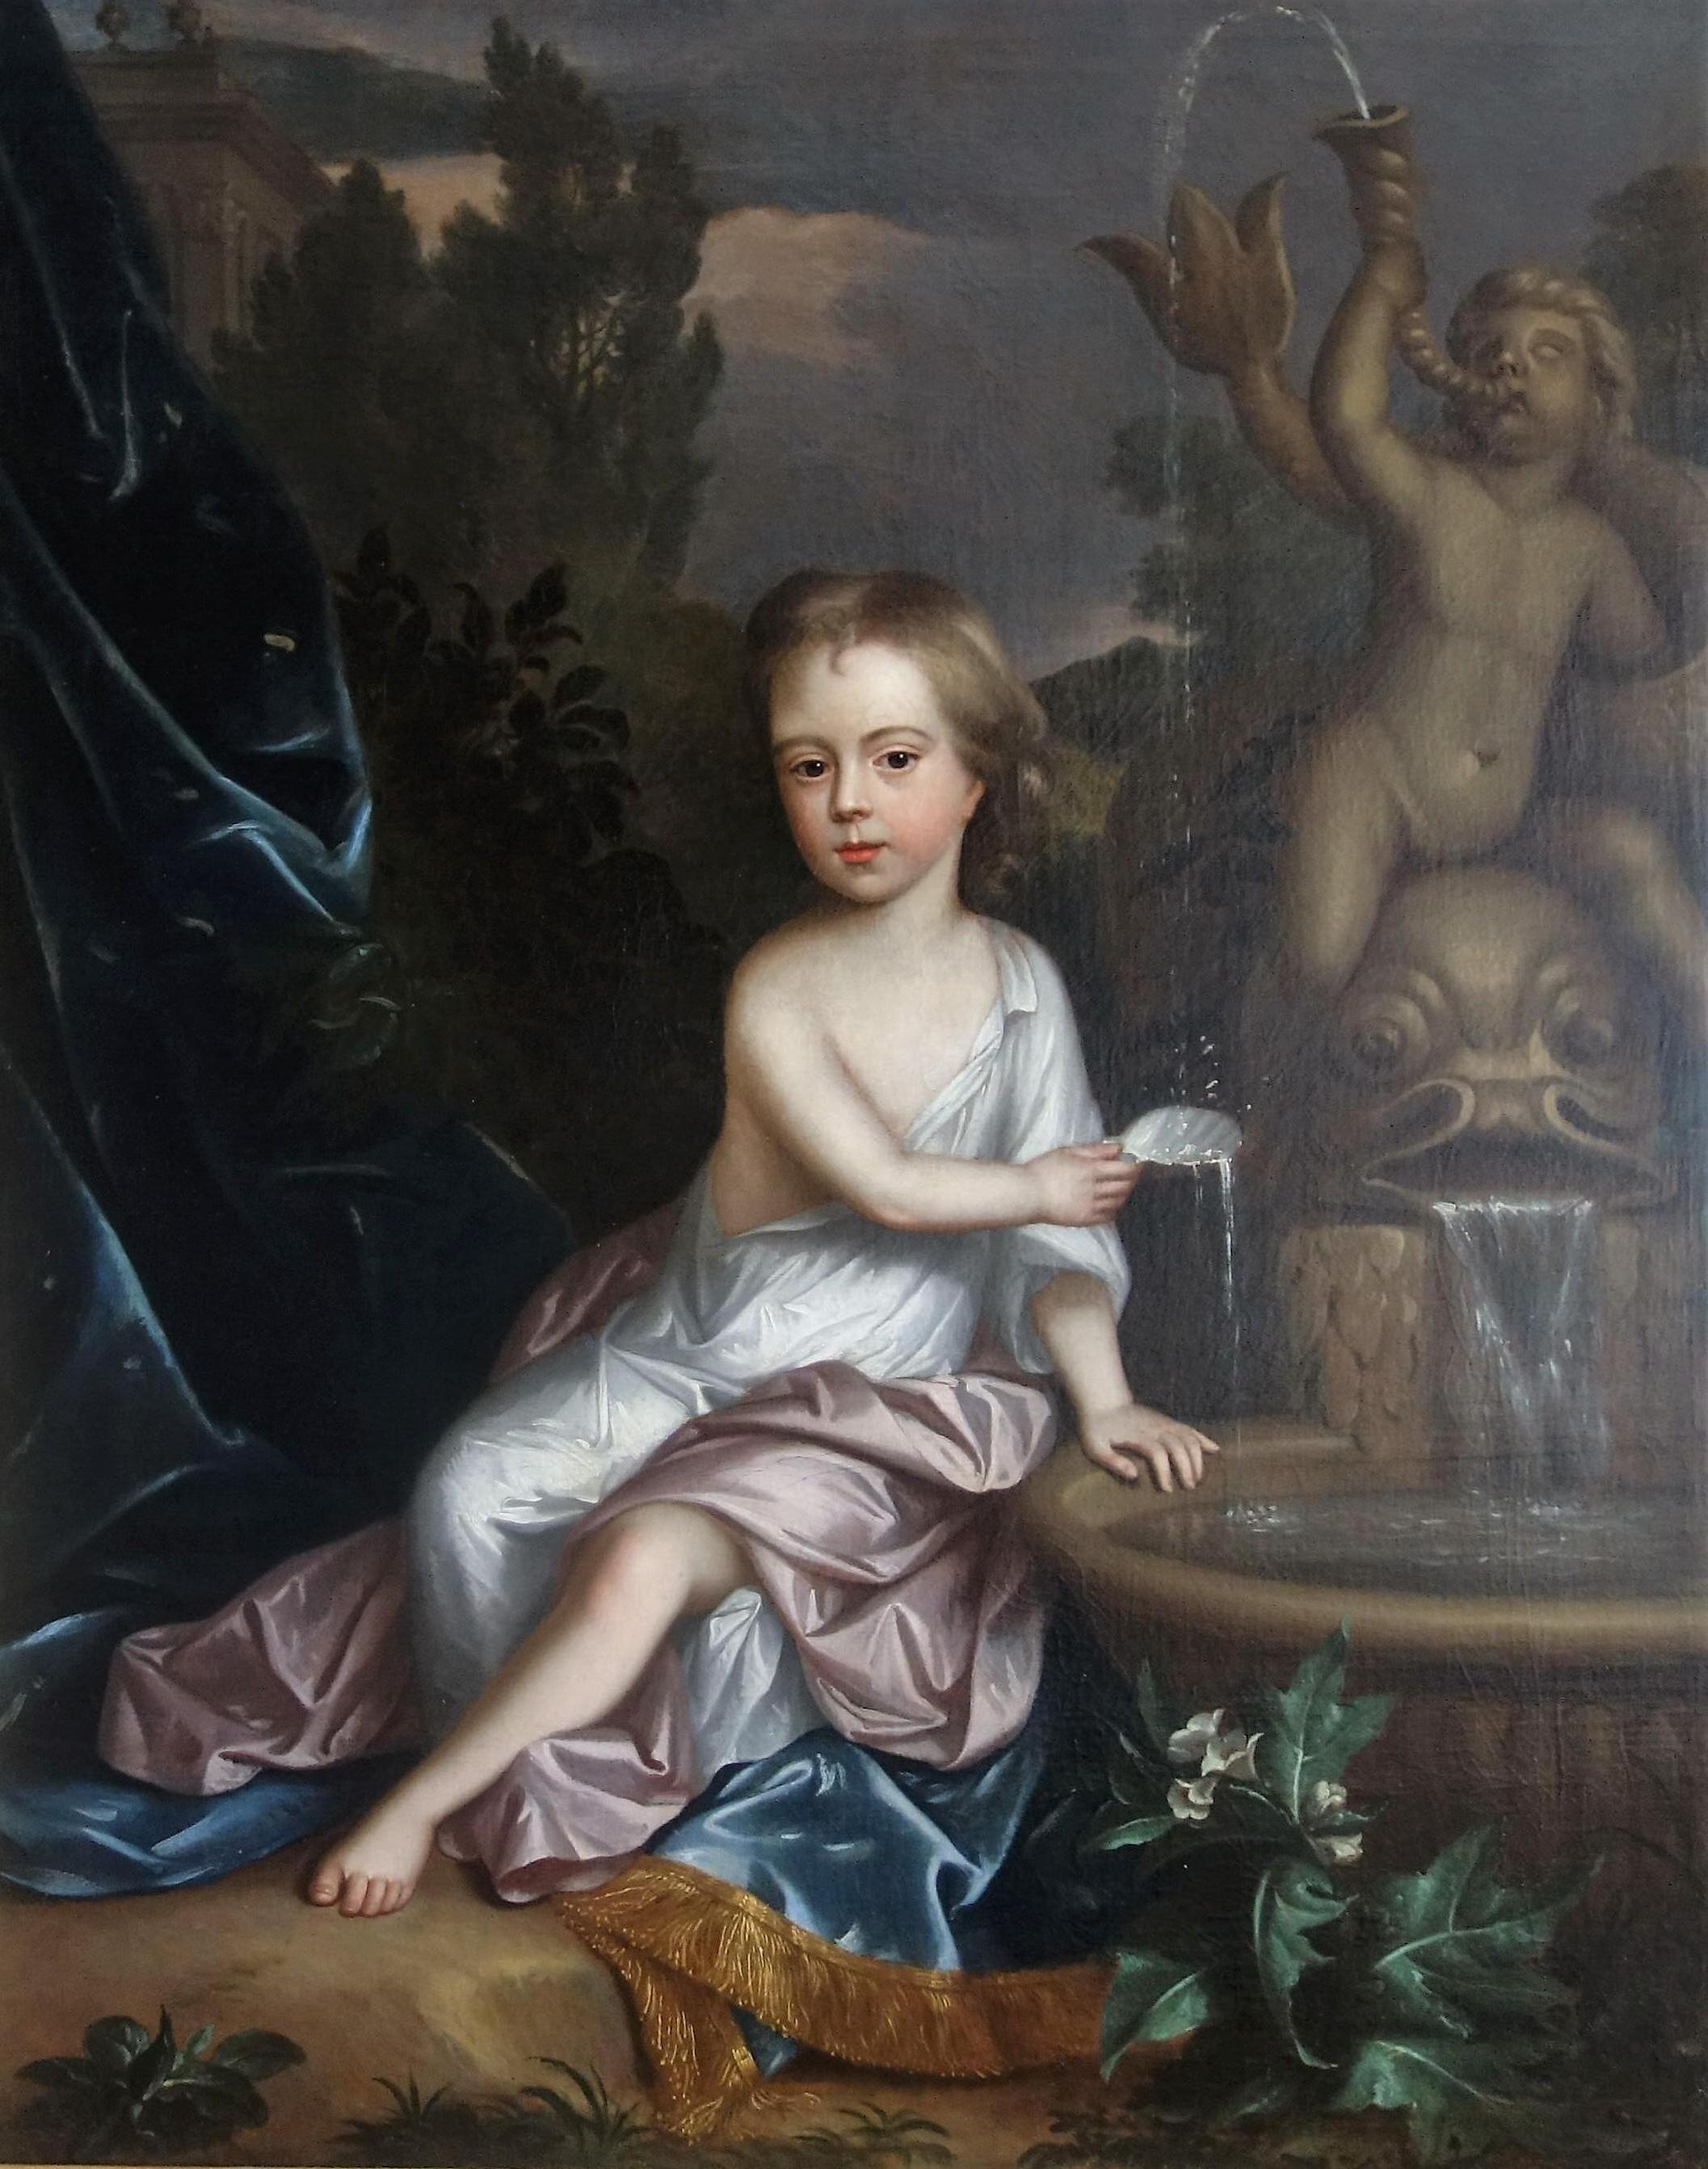 English 17th century portrait of James Thynne as a young boy by a fountain